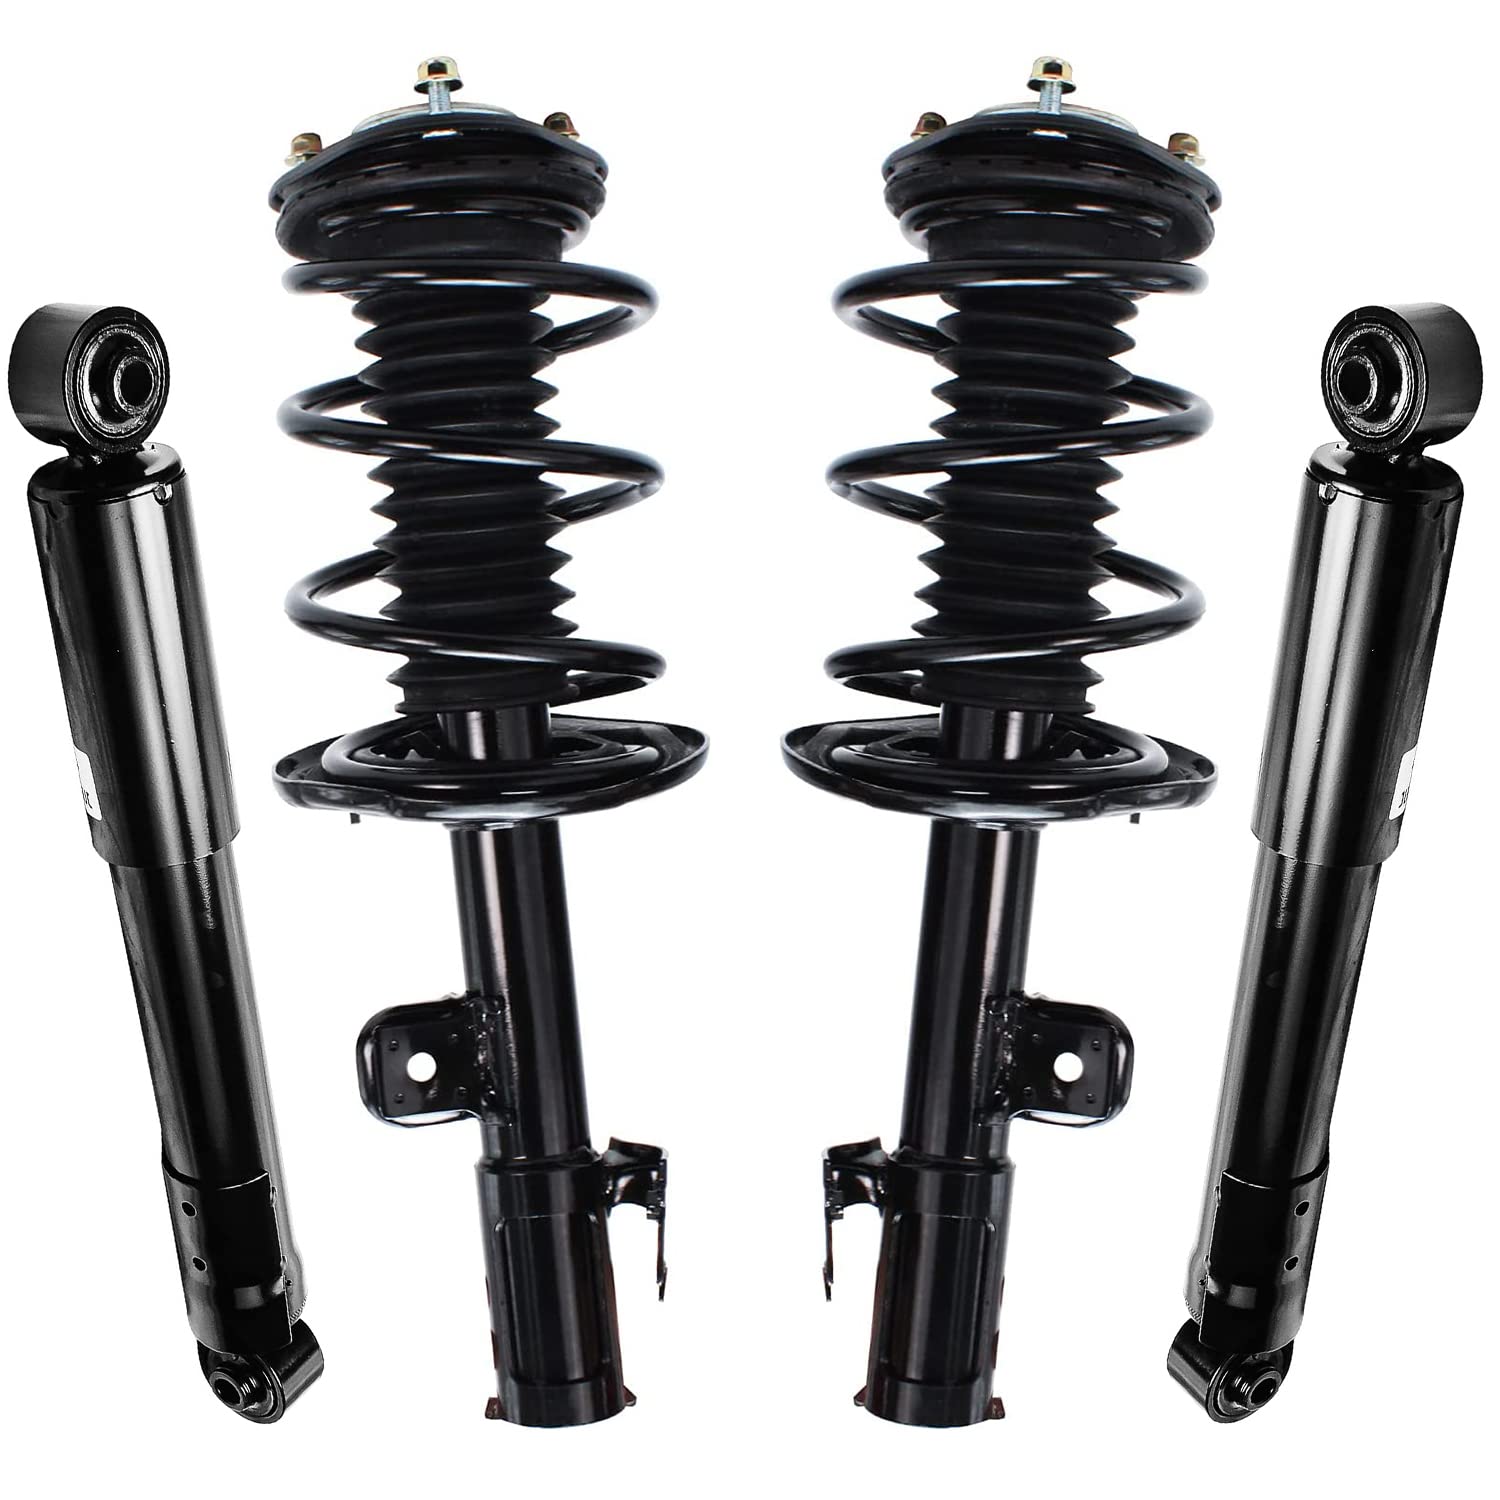 Need New Shocks for Your Honda Element in 2024: Expert Guide to Replacing Struts on 03-11 Models